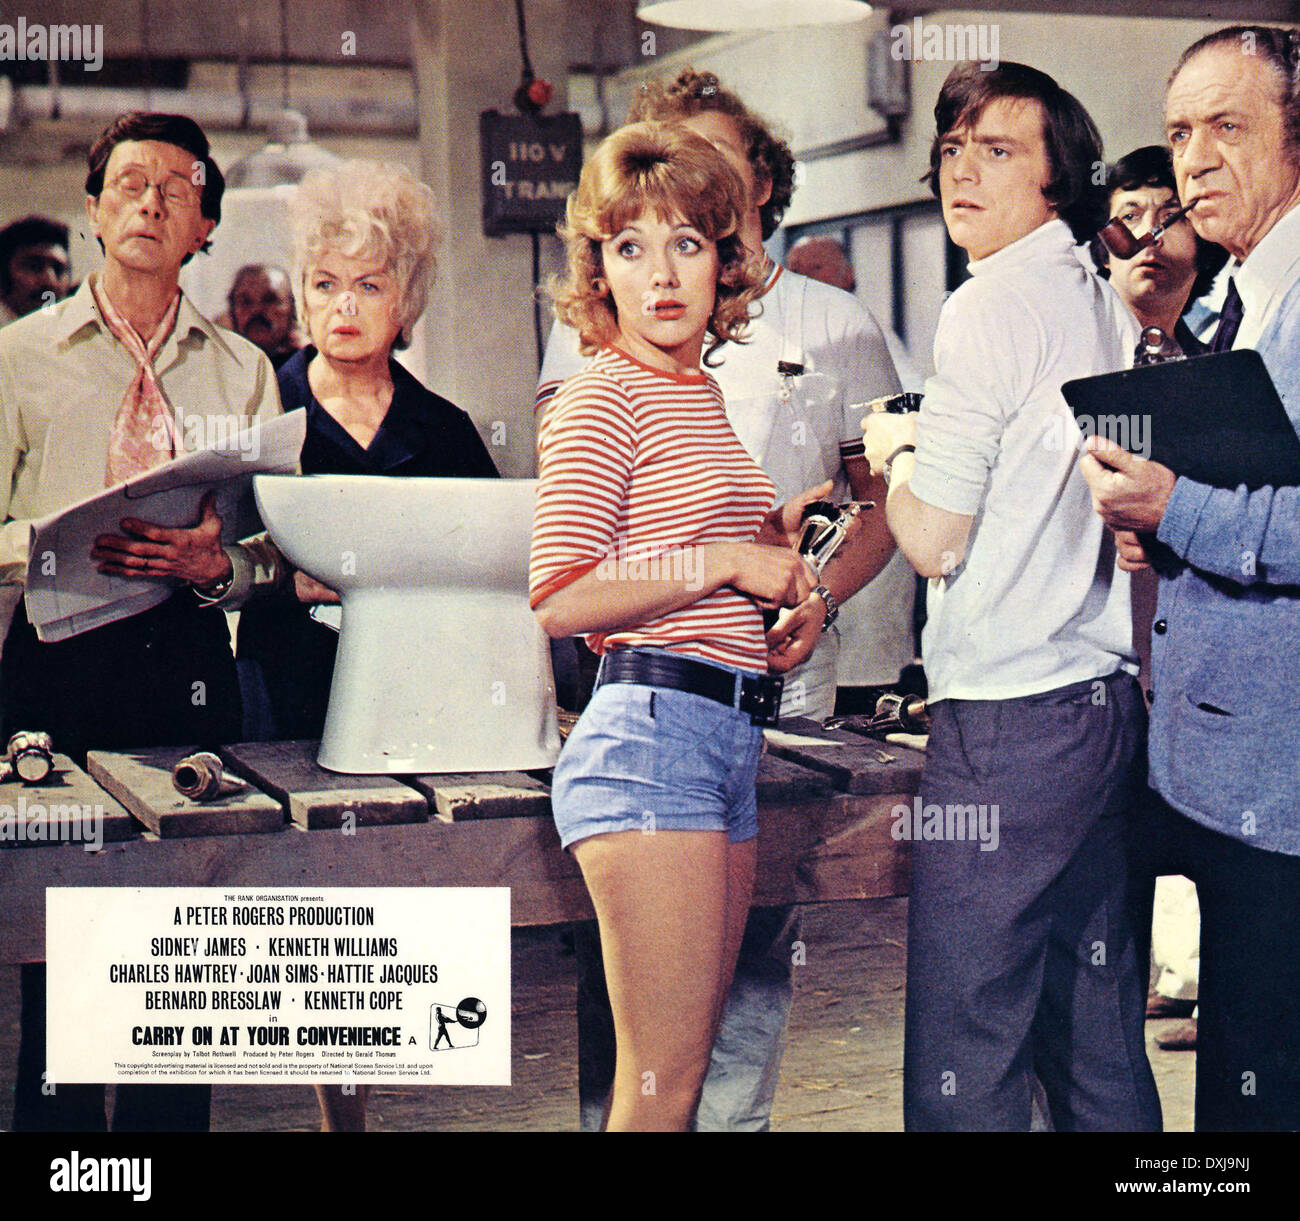 CHARLES HAWTREY, SID JAMES AND CO-WORKERS PICTURE FROM THE R Stock Photo